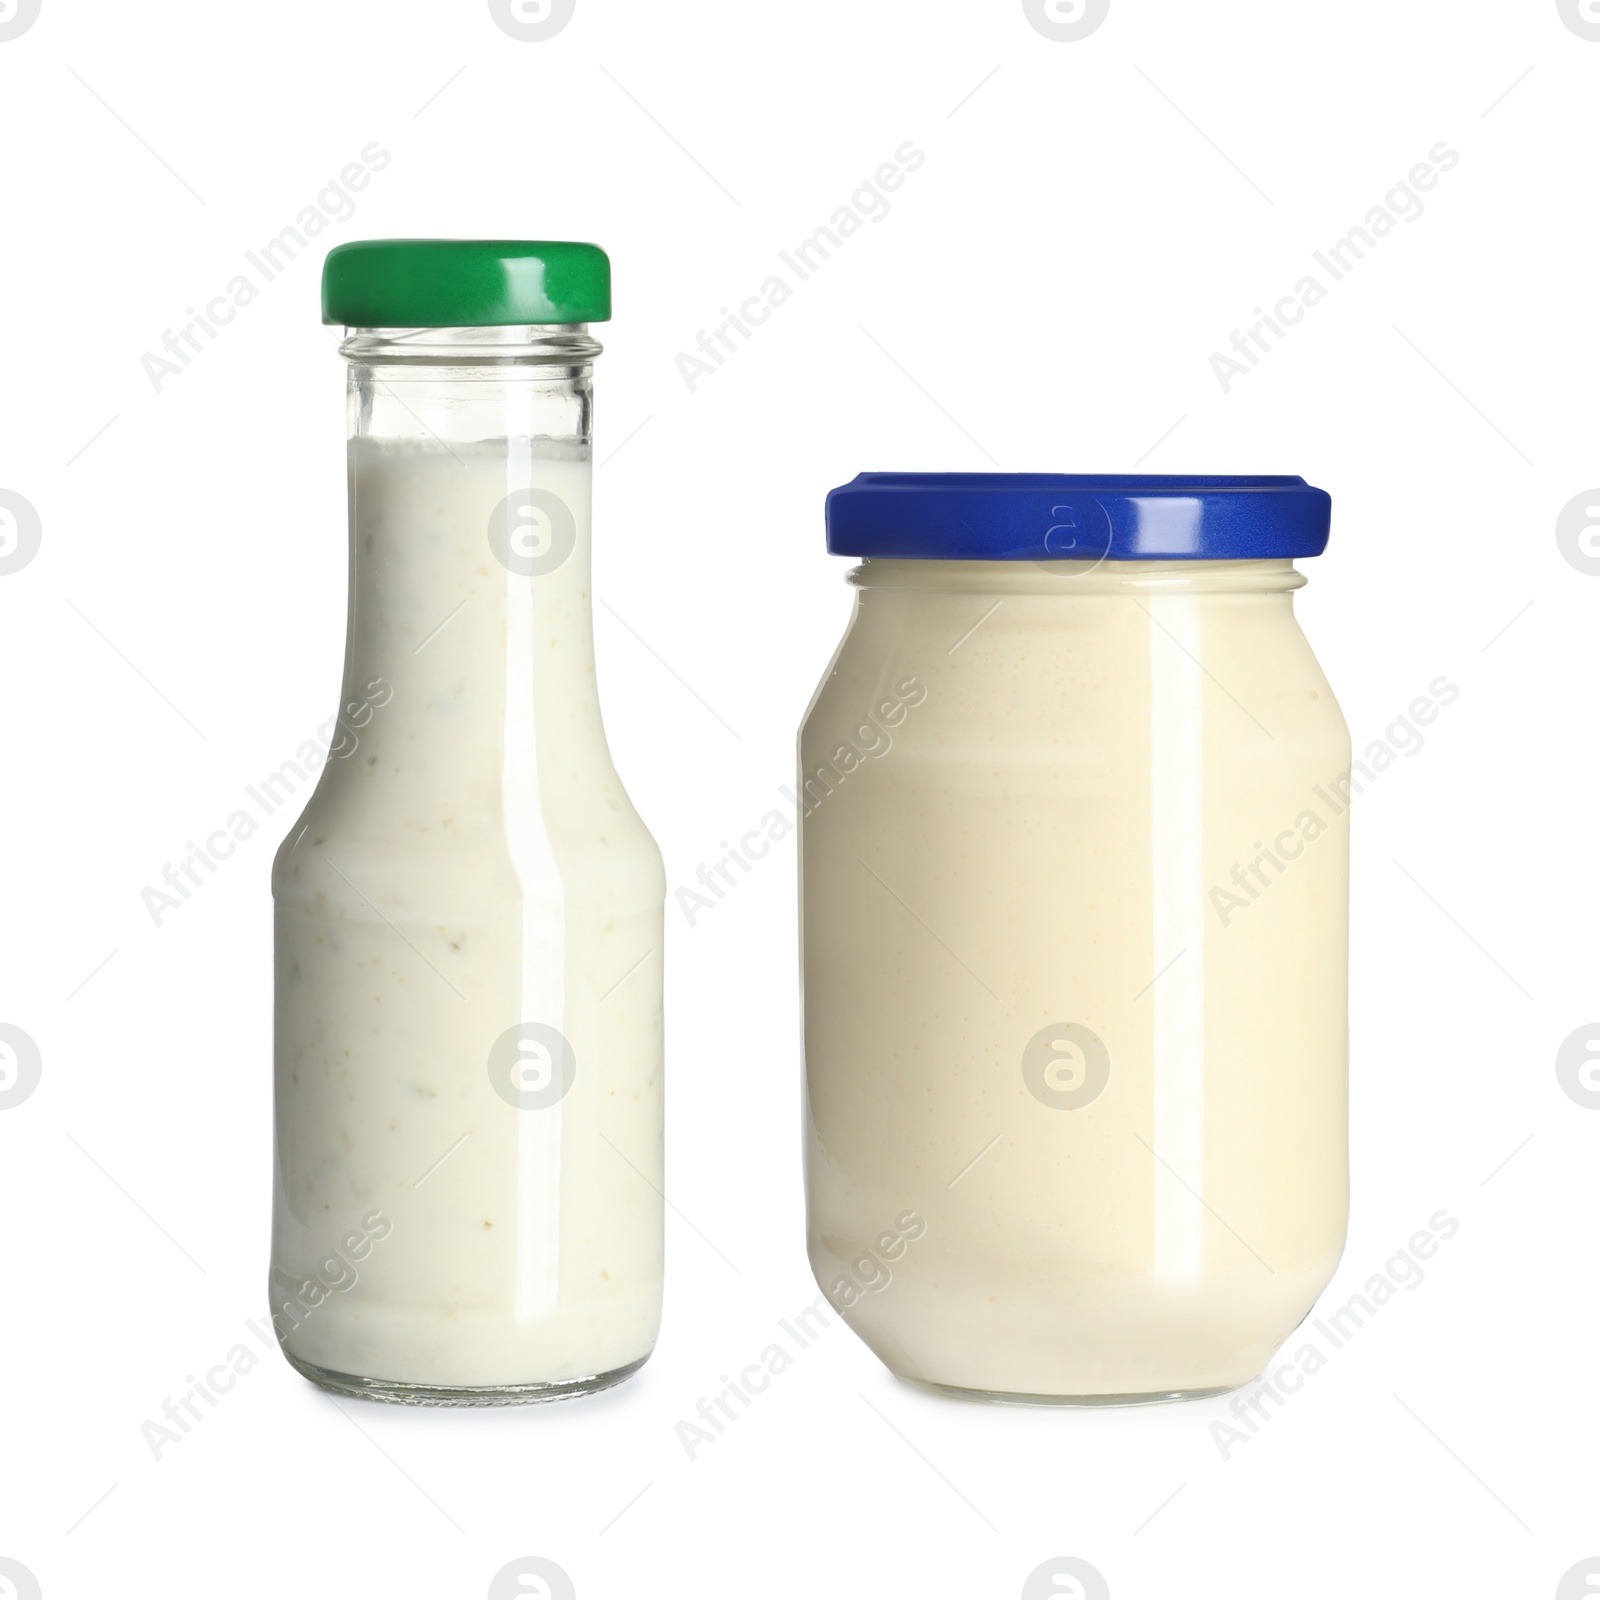 Image of Delicious sauces in glassware on white background